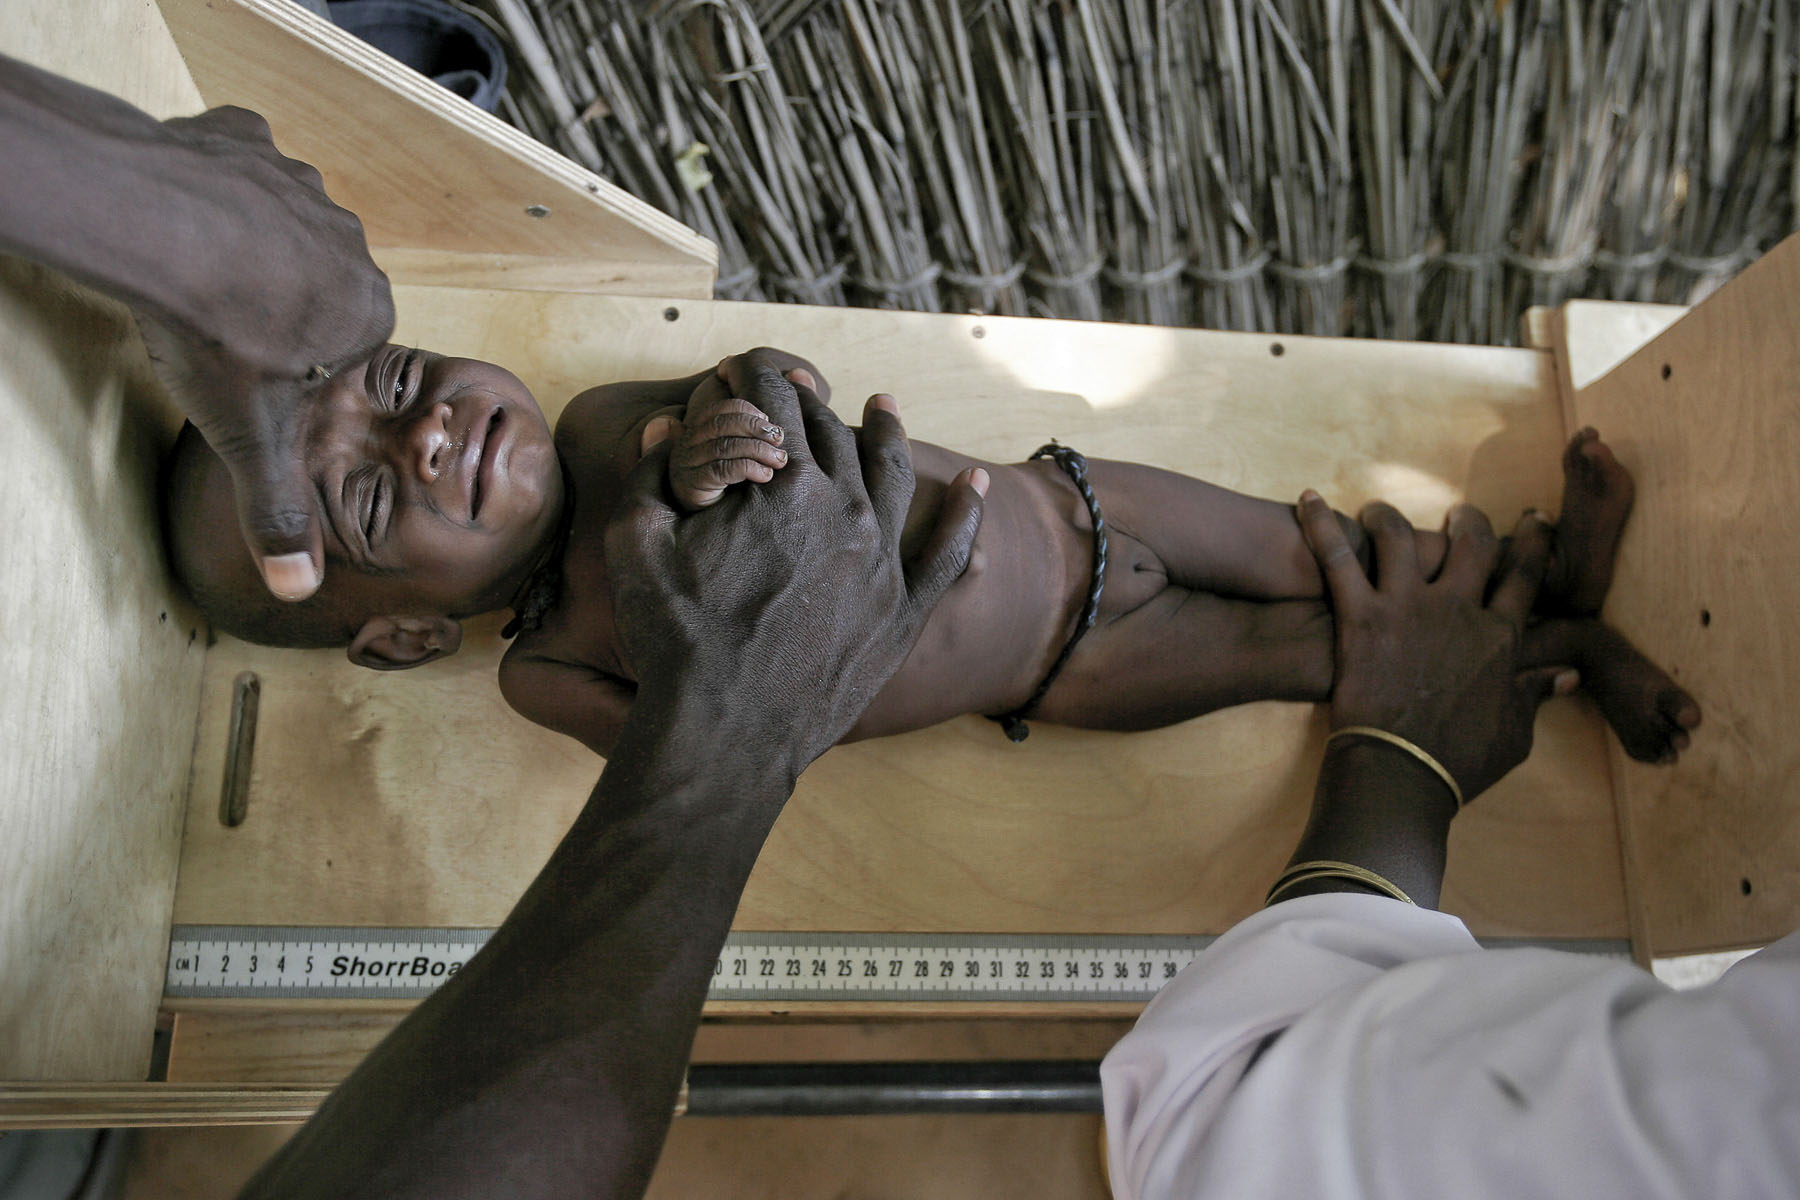 Children malnutrition detection in a MSF (Doctors Without Borders) center in September 2005